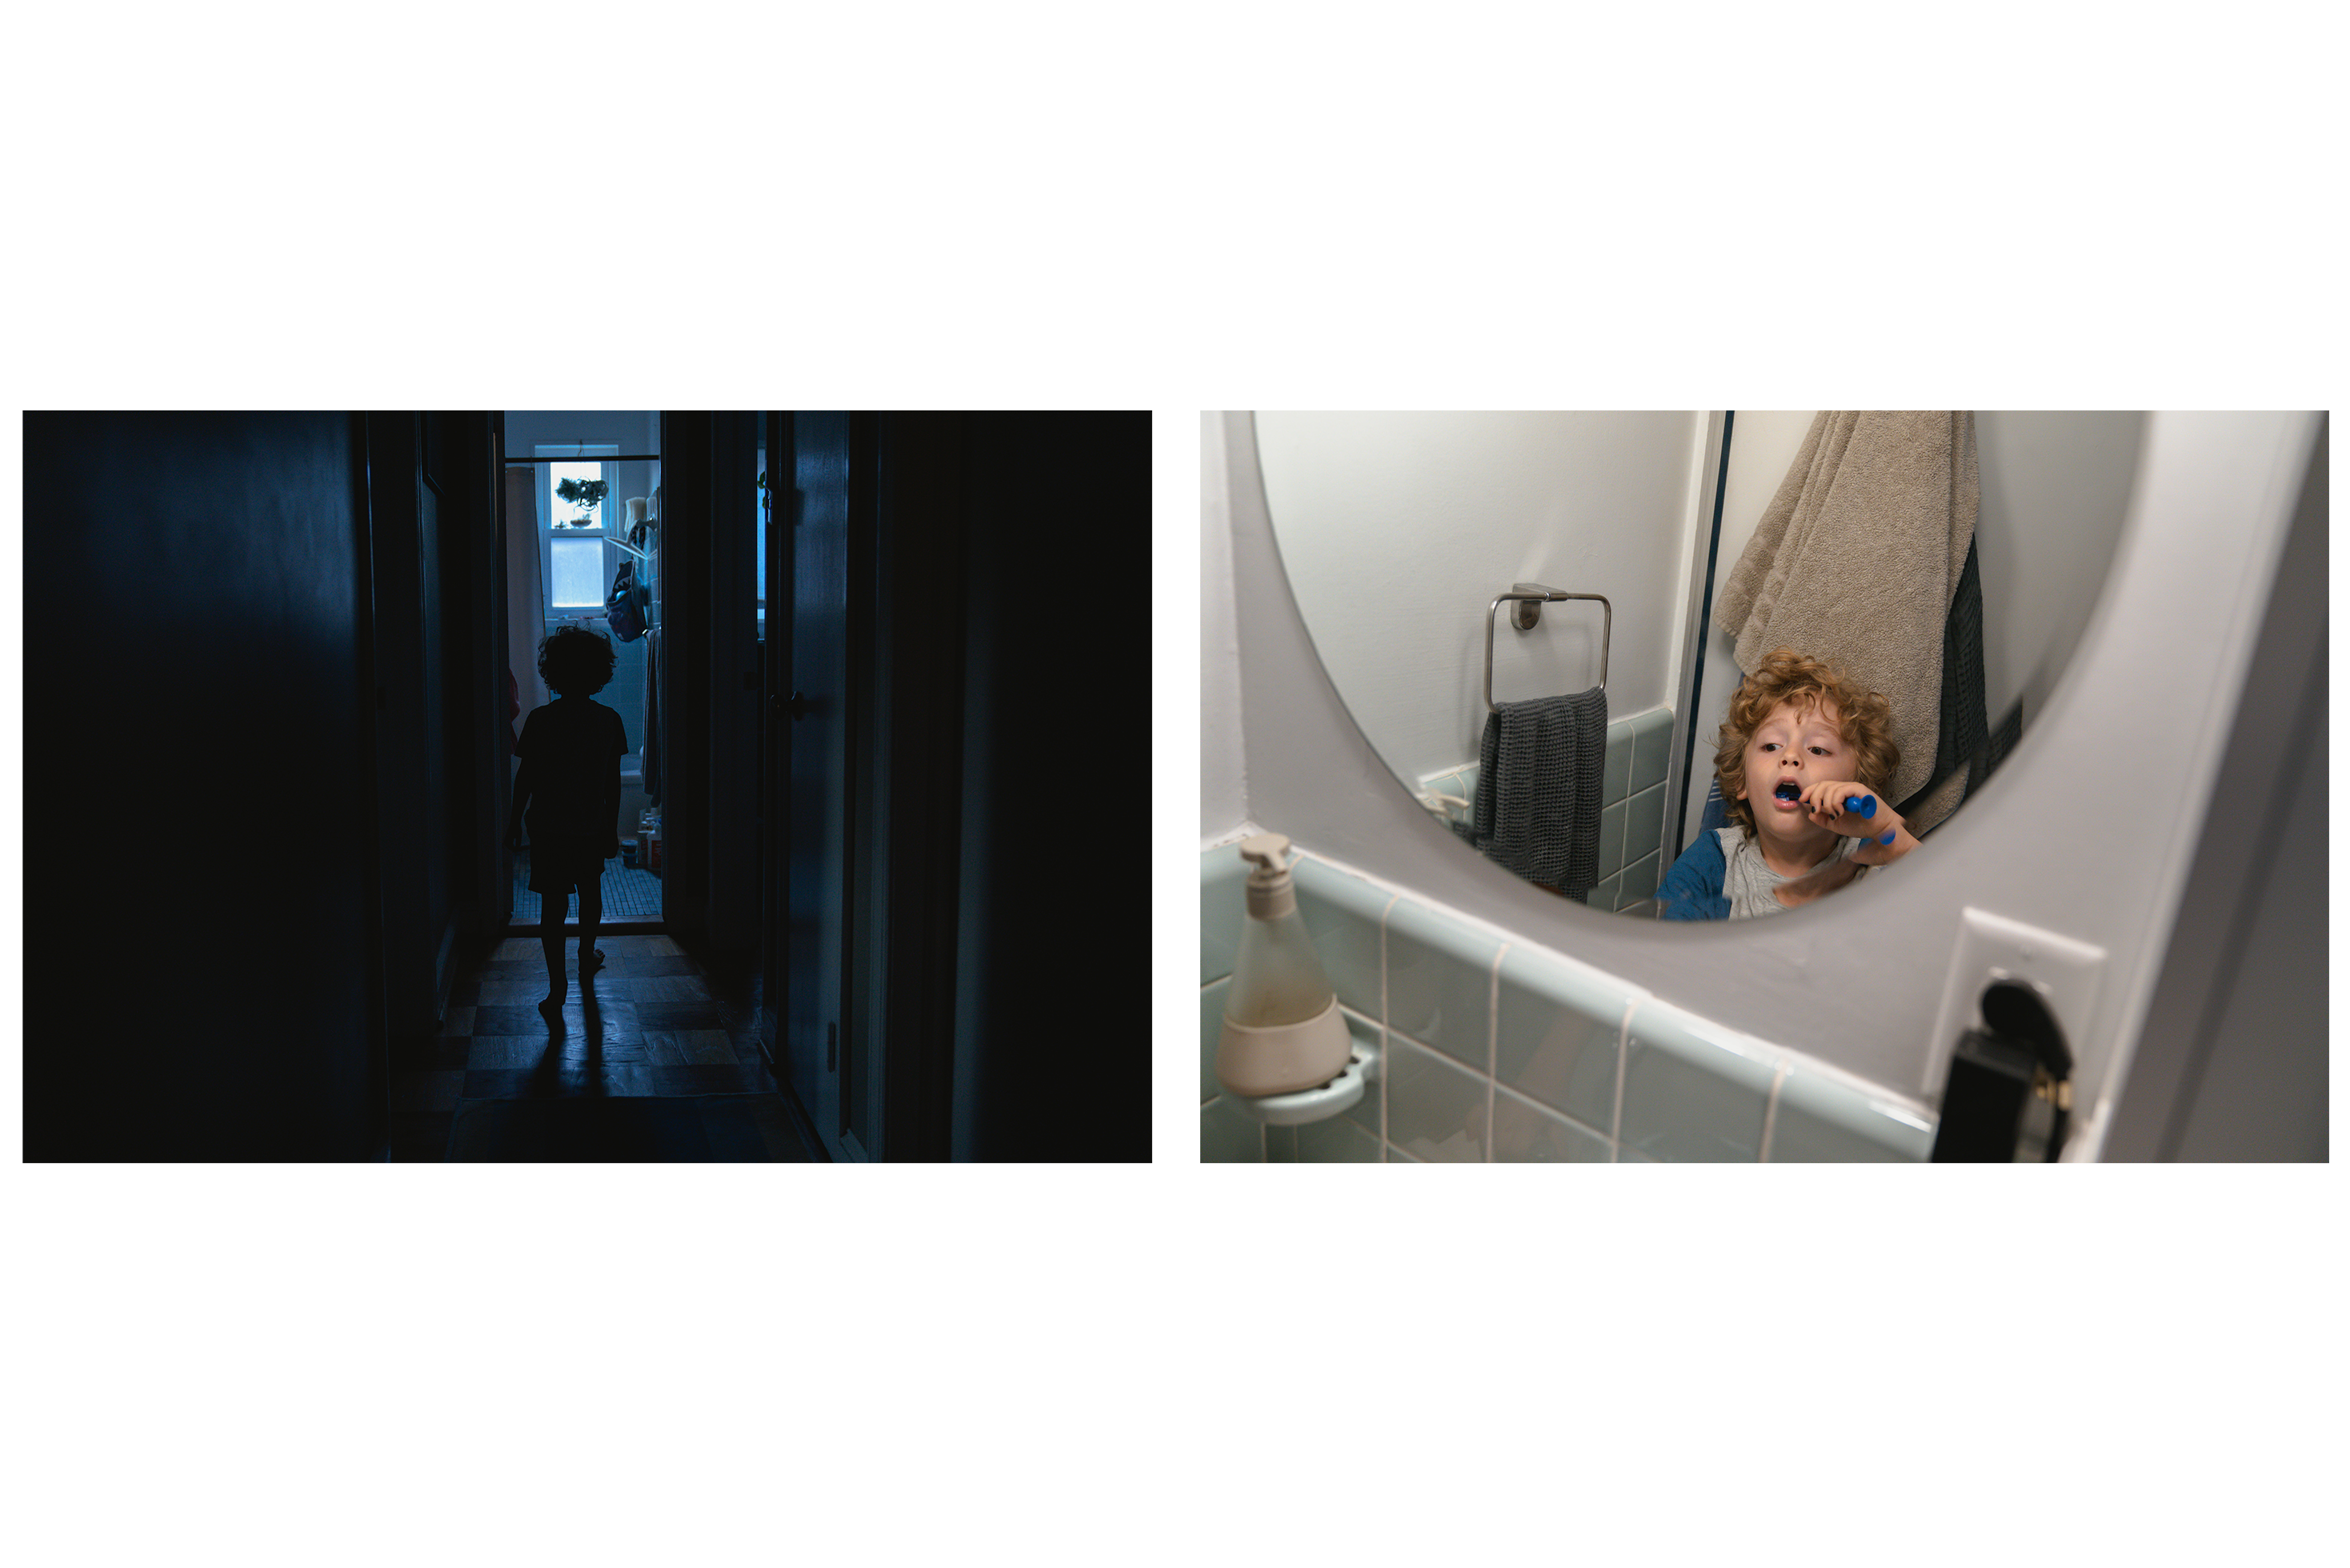 Left: Oscar walks to the bathroom in his house in Arlington, VA on Wednesday, September 15, 2021. Right: Oscar brushes his teeth in his house in...